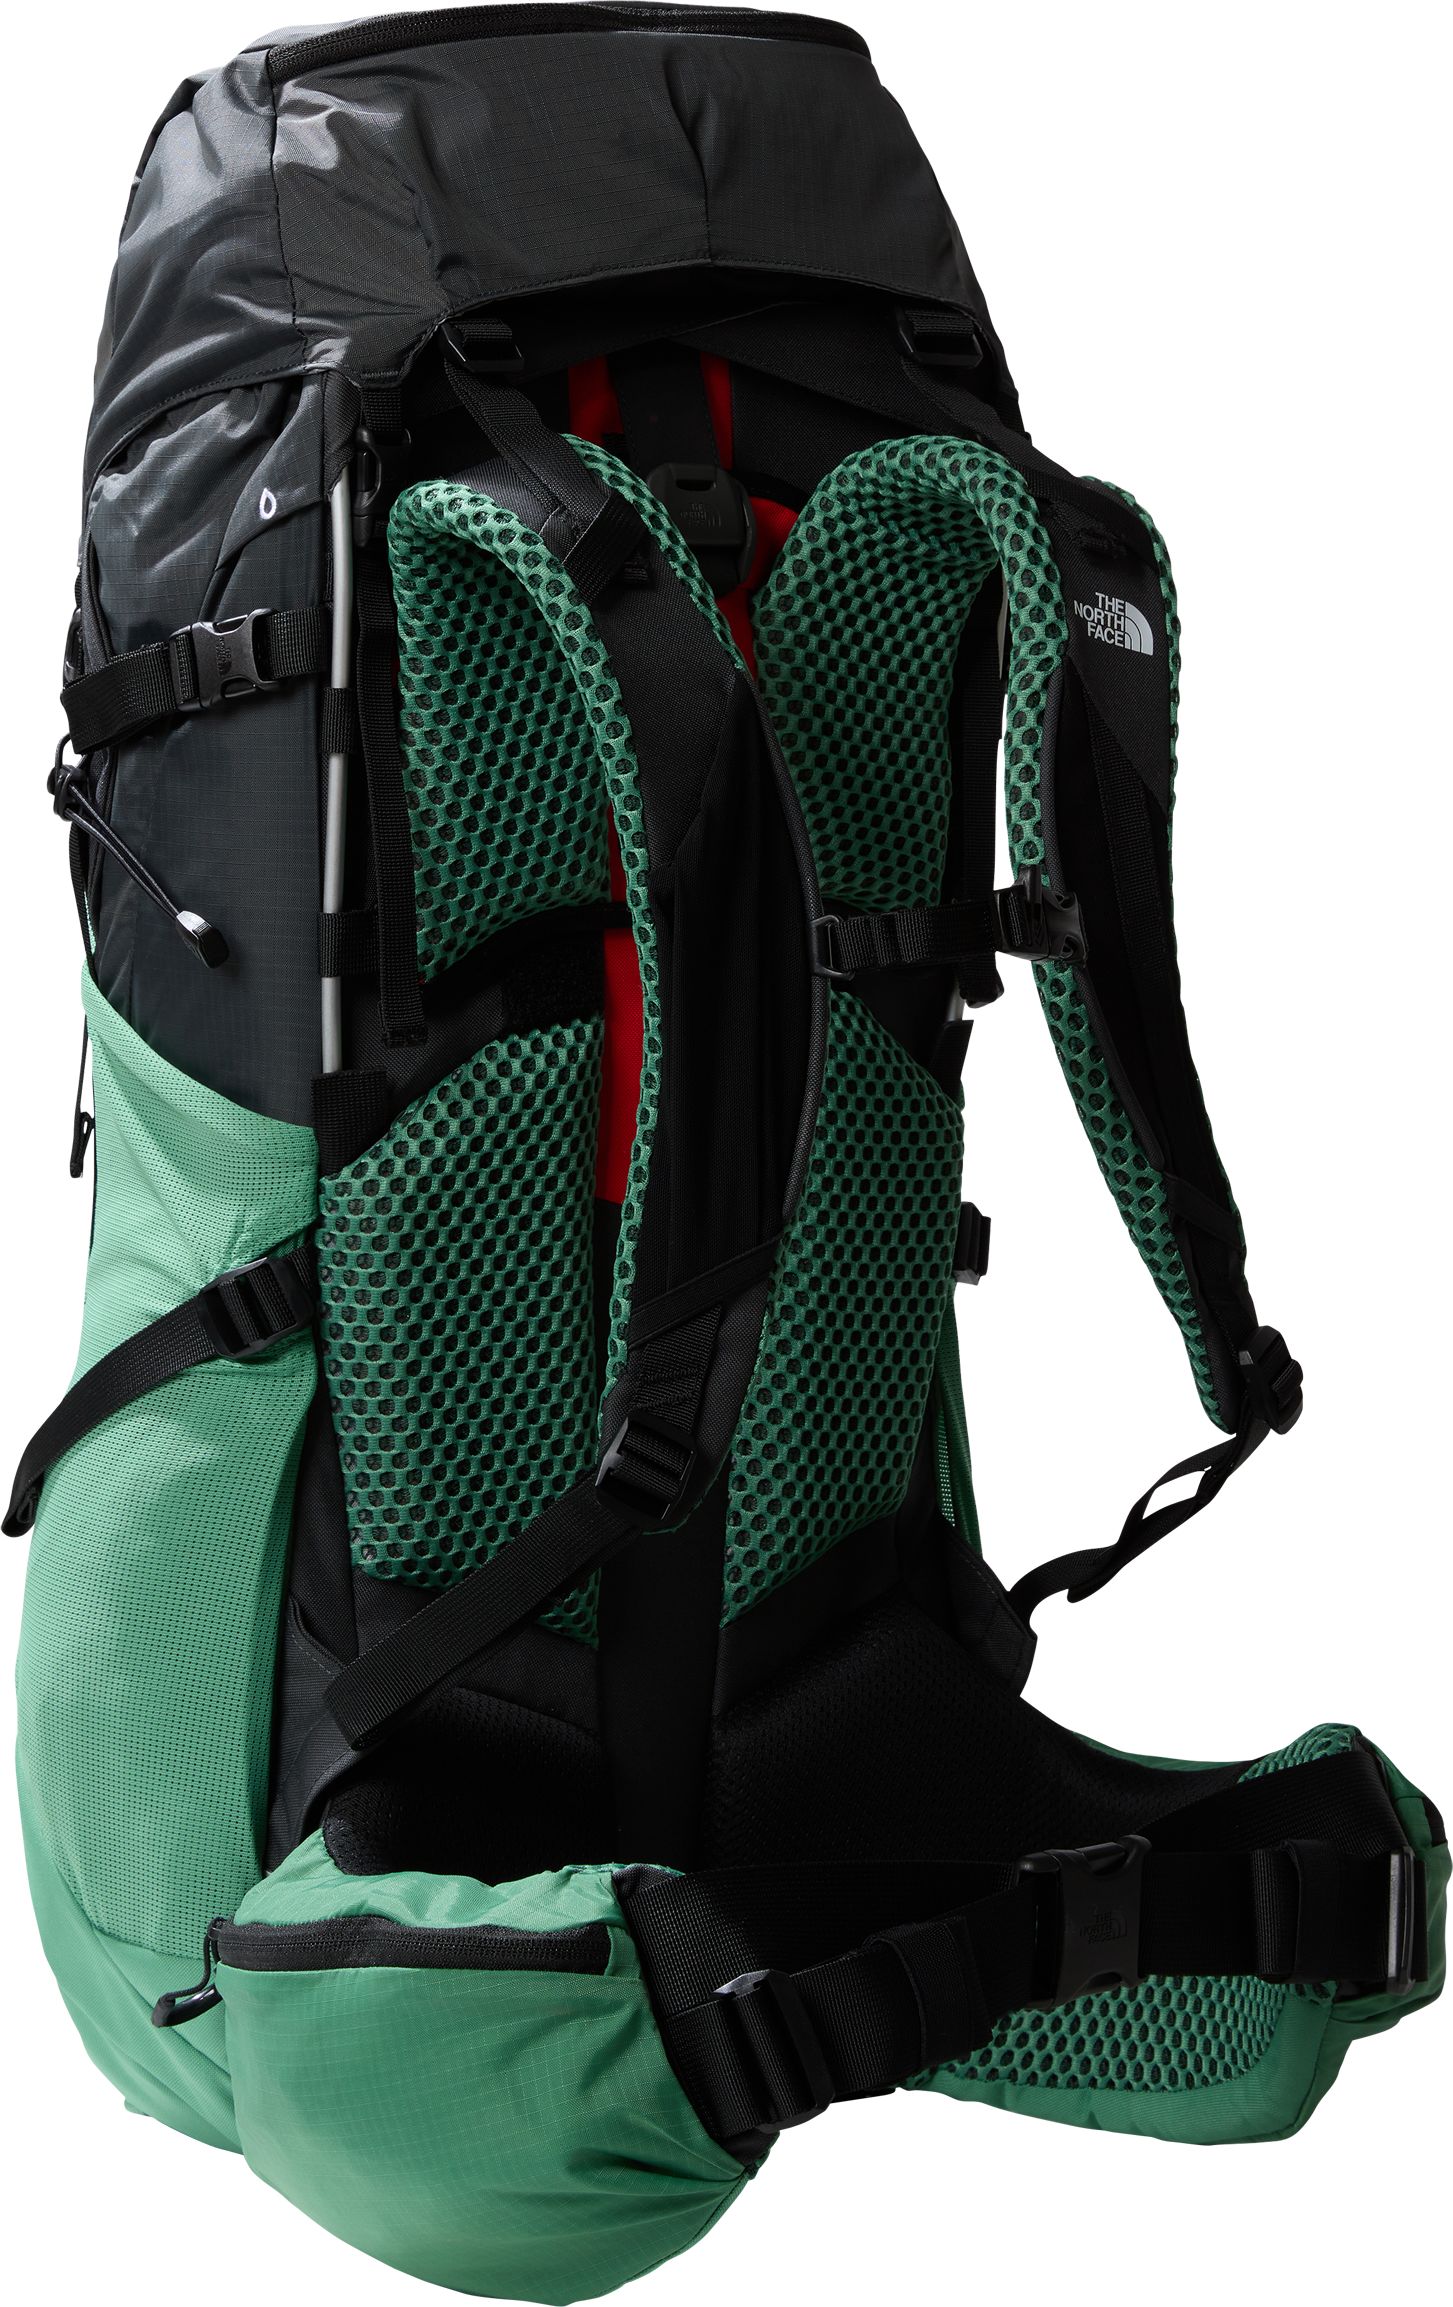 THE NORTH FACE, TRAIL LITE 50